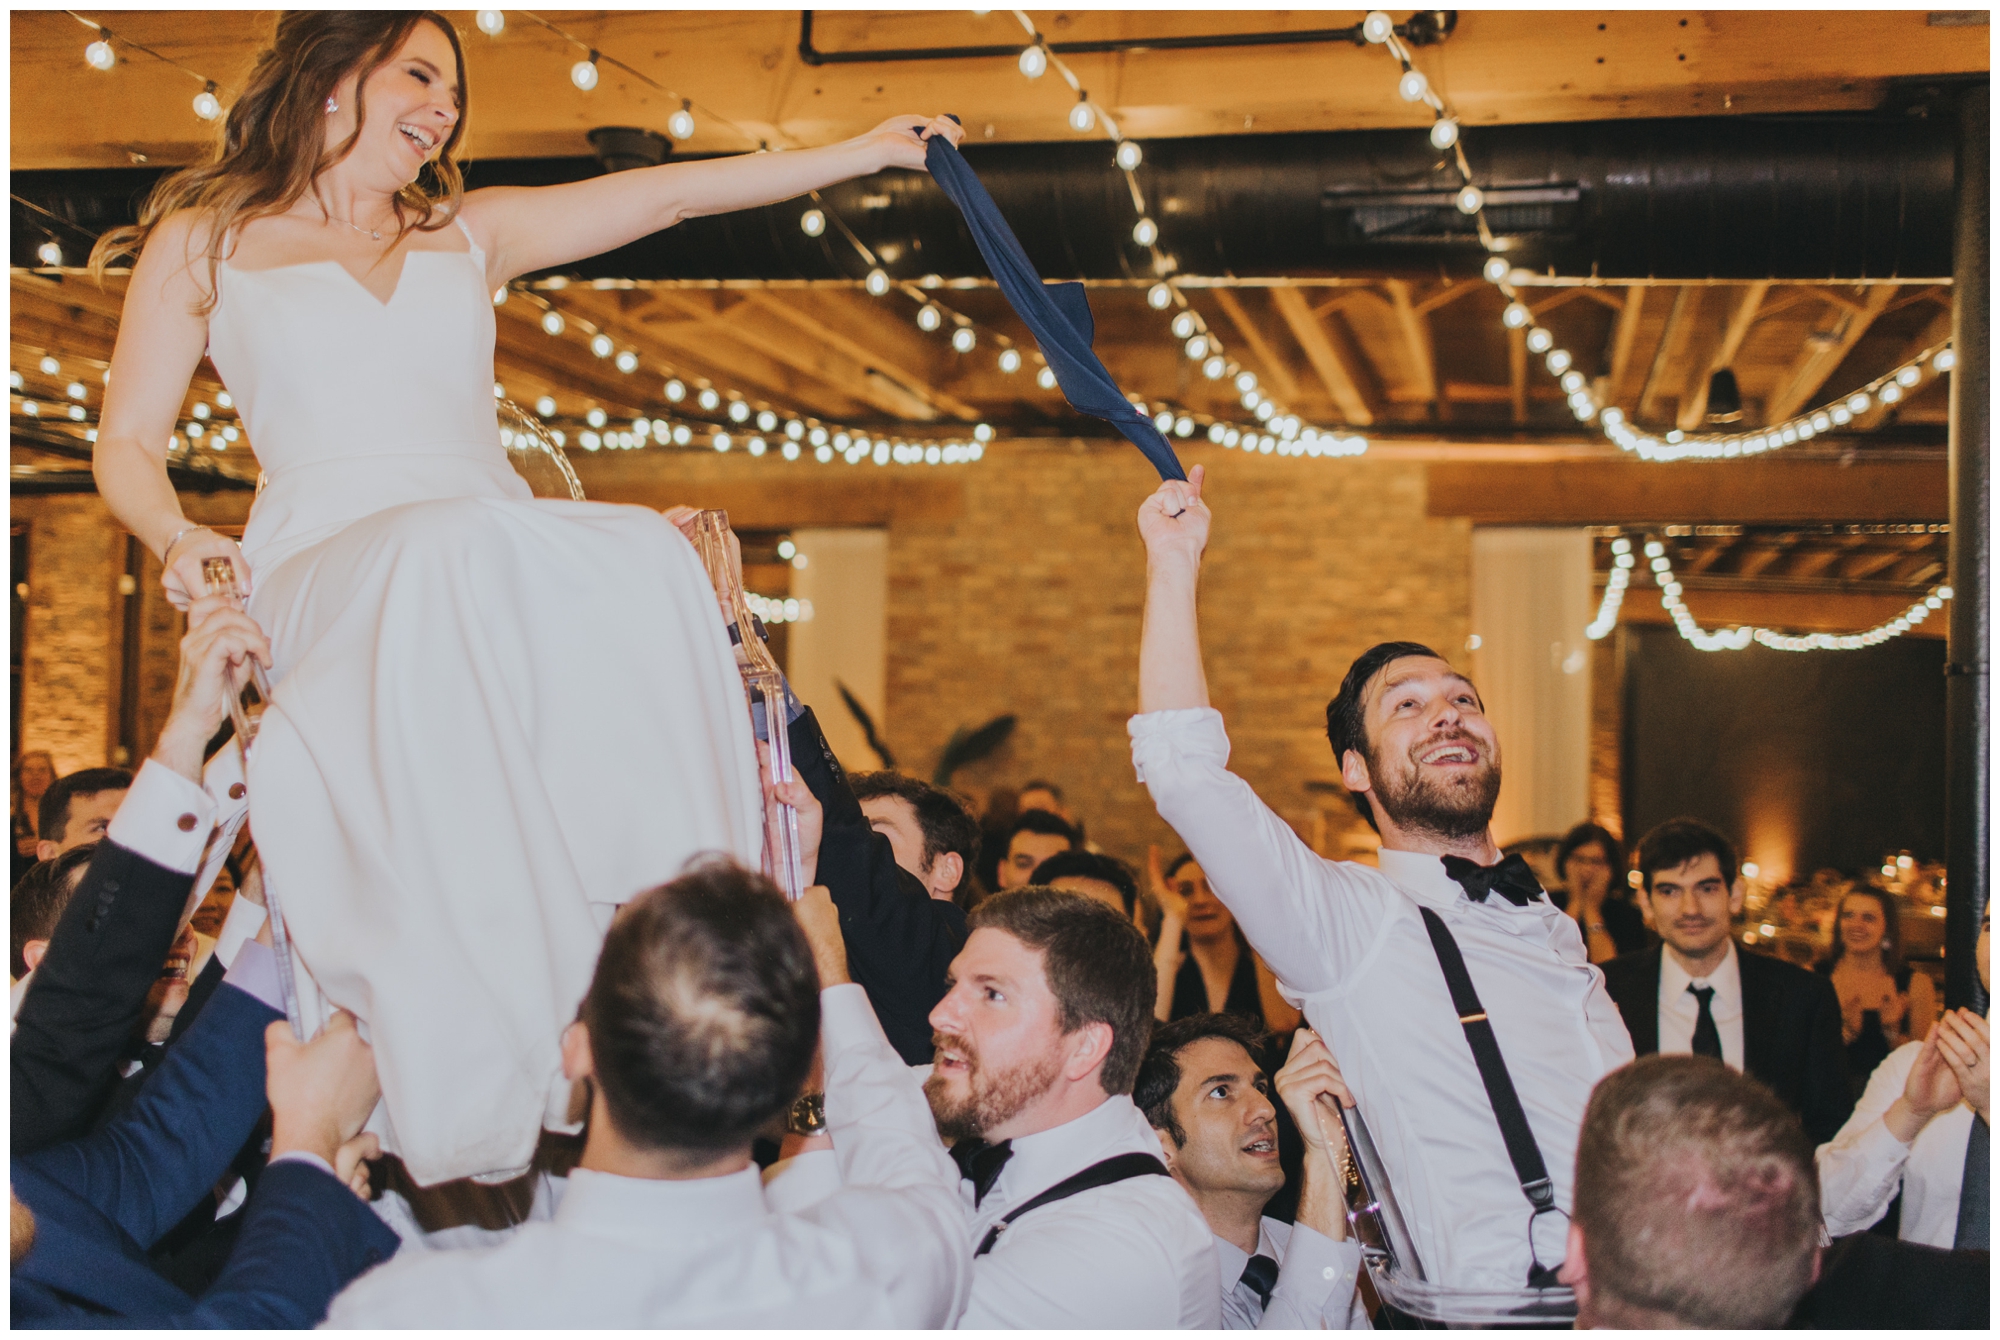 dancing the Hora at a wedding